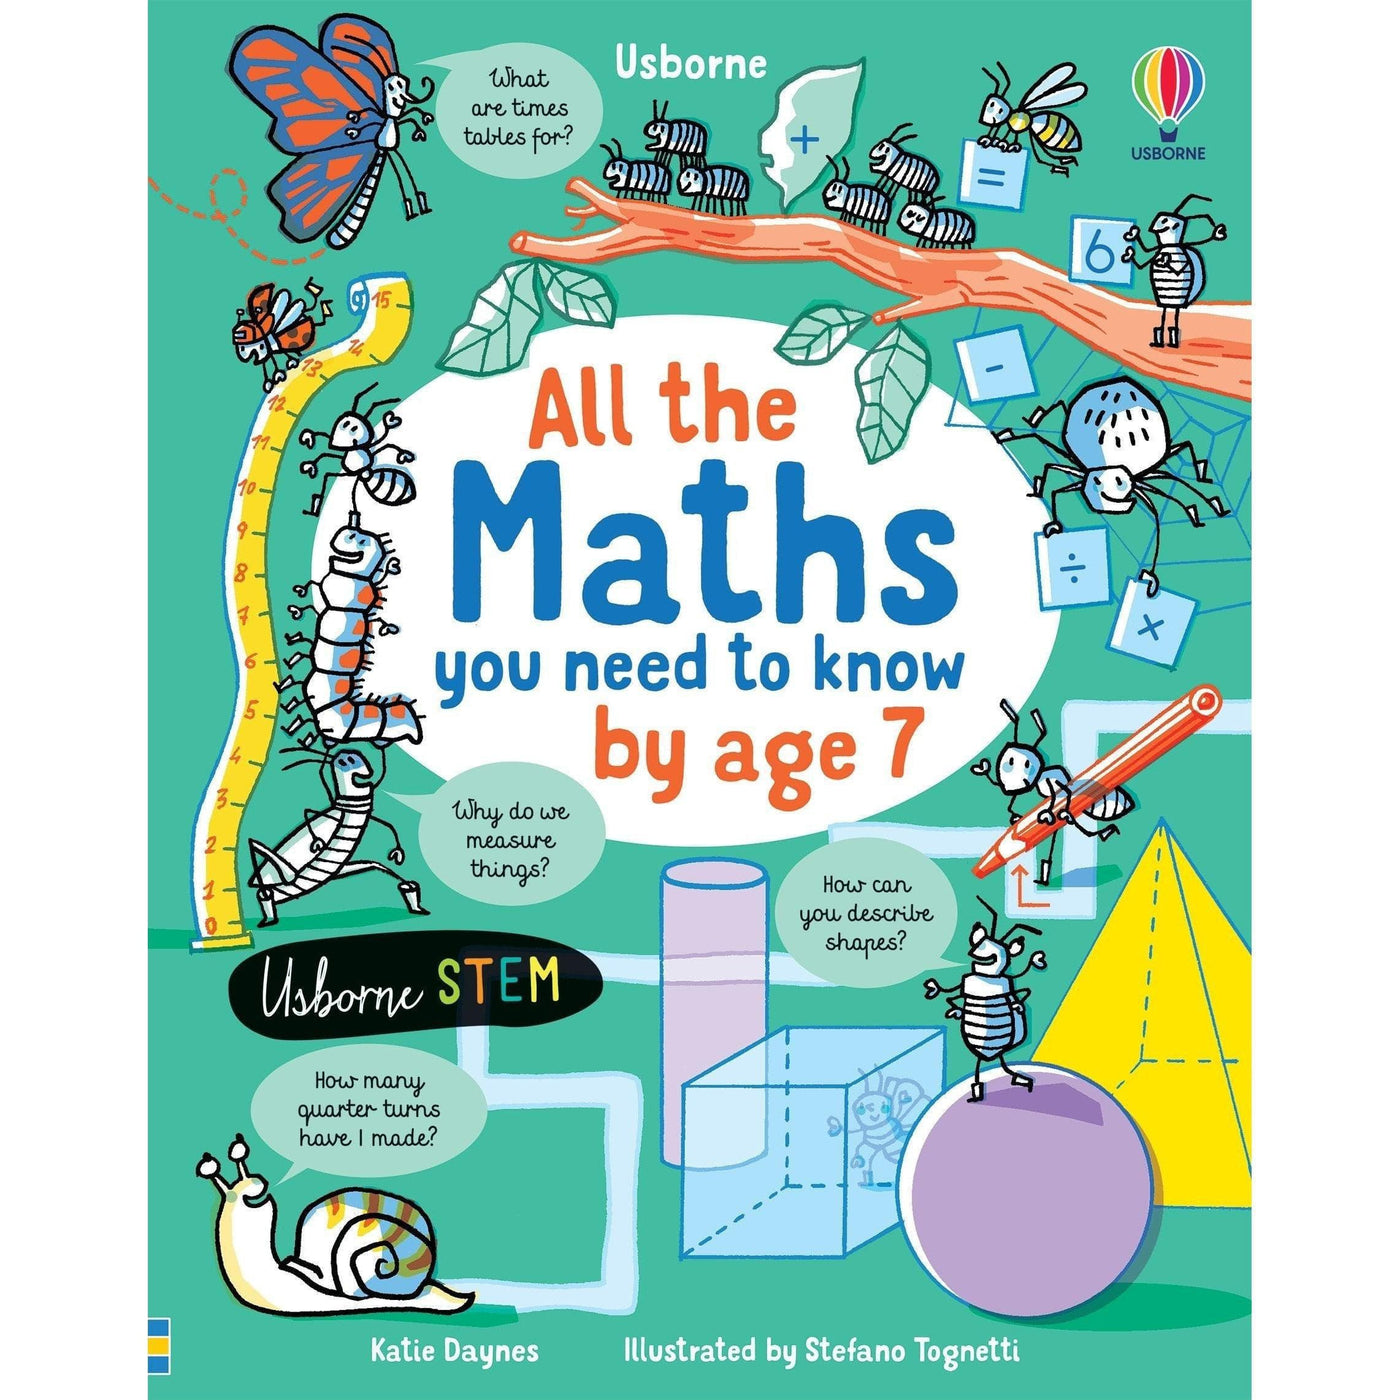 All The Maths You Need To Know By Age 7 - Katie Daynes & Stefano Tognetti